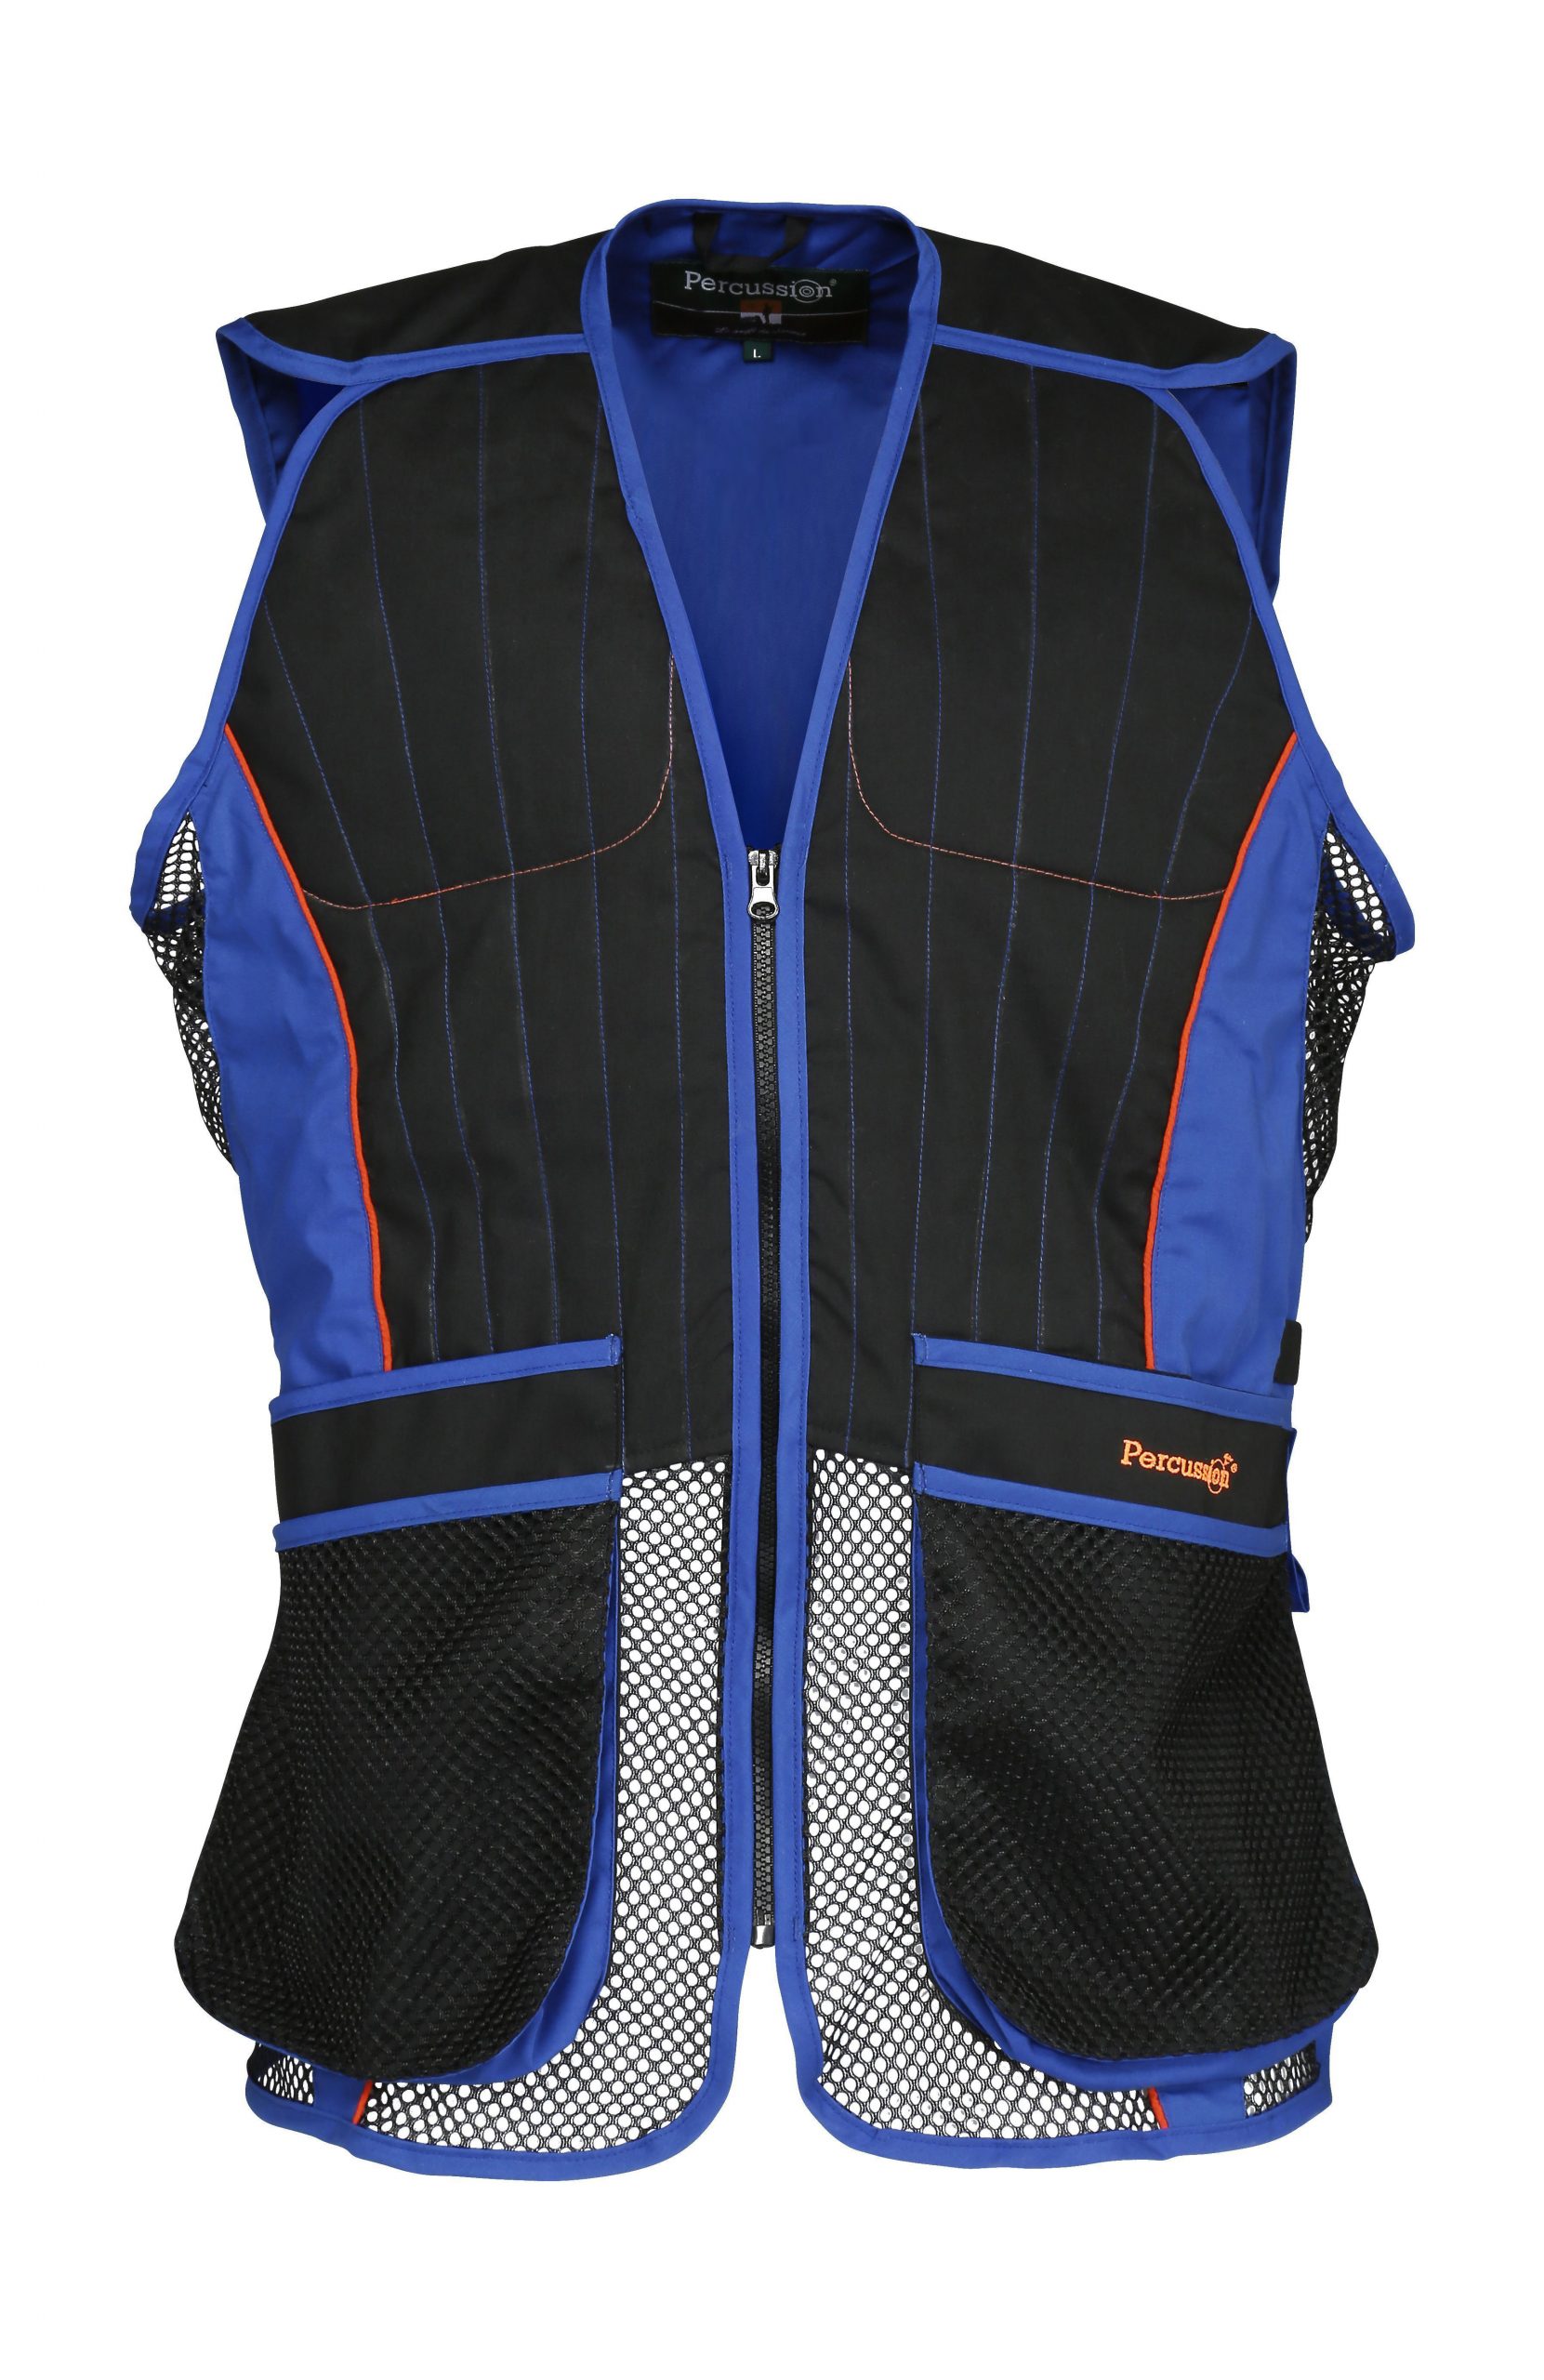 Percussion Skeet Vest in Black and Red Clay Pigeon shooting 